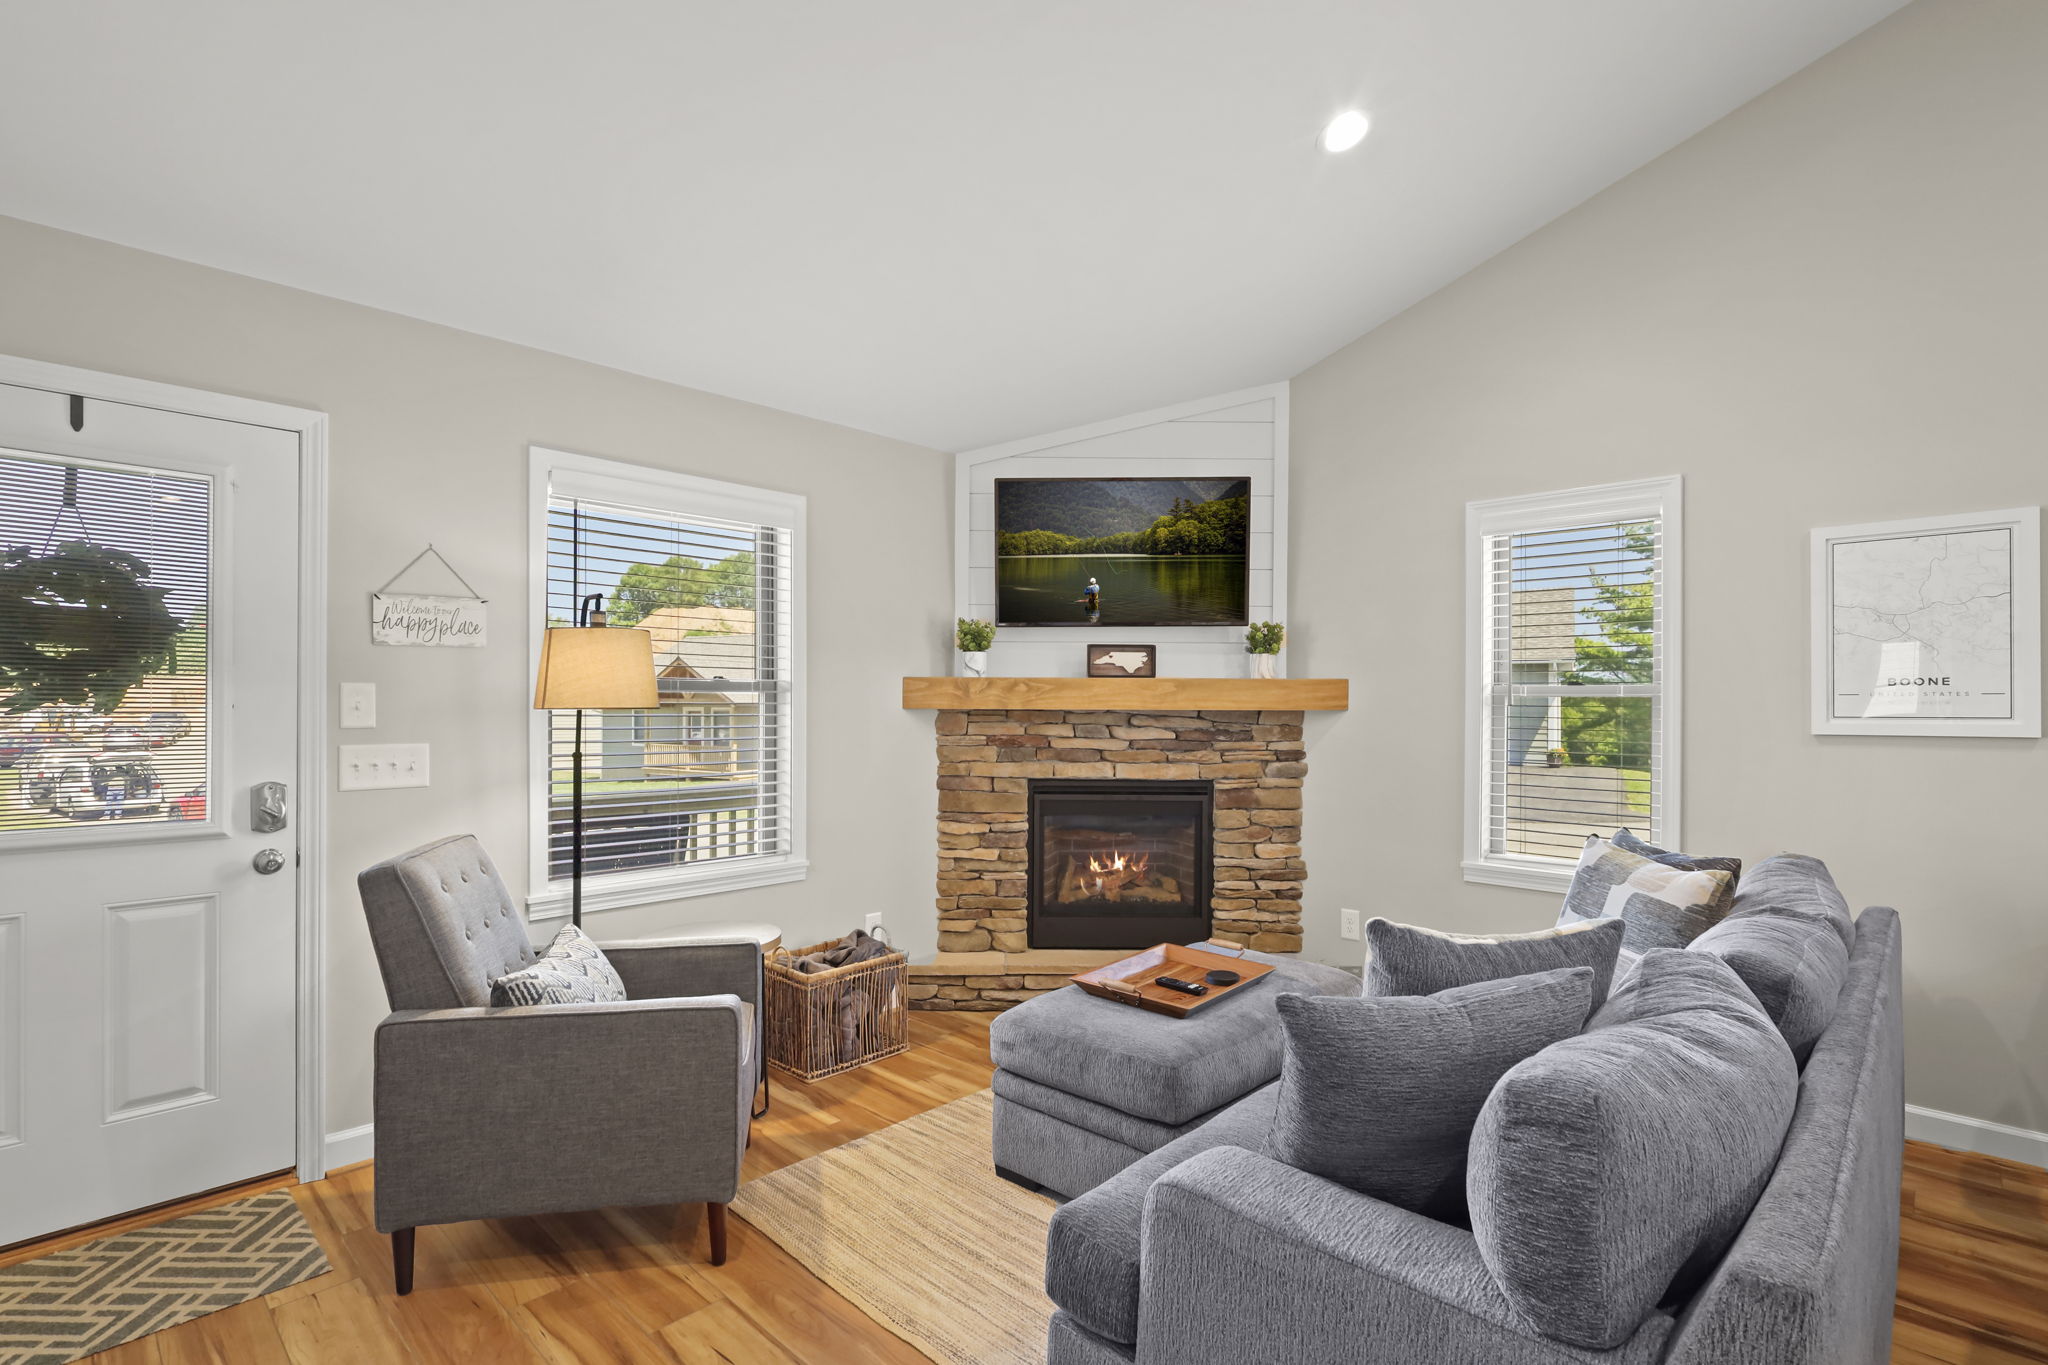 Cozy up: Plush sofa, chic chair, TV, deck views, and a crackling indoor fireplace.